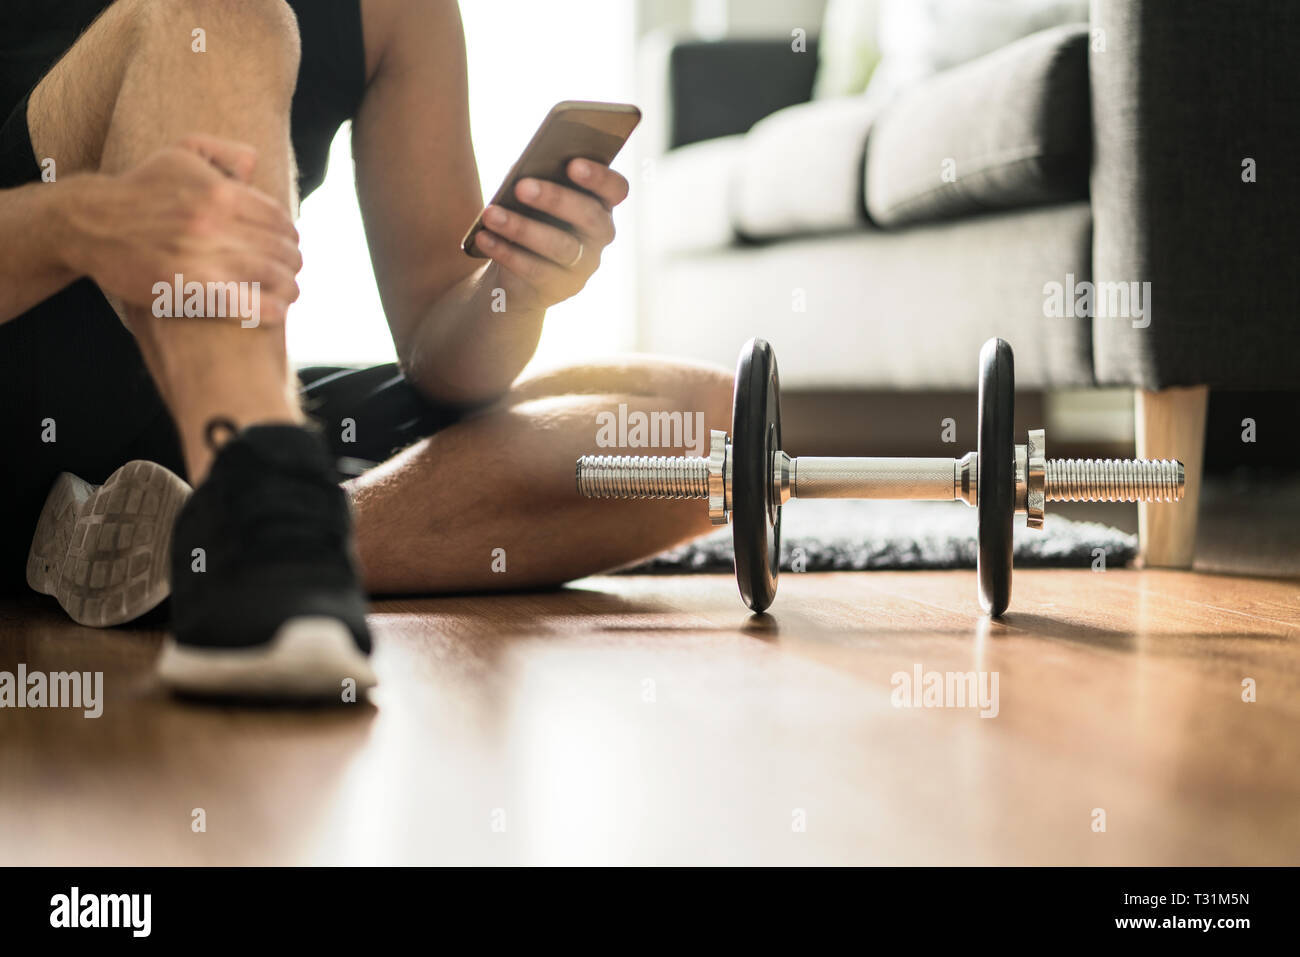 Man using smartphone during workout at home. Online personal trainer or on mobile phone. Internet fitness class or video course. Taking a break. Stock Photo